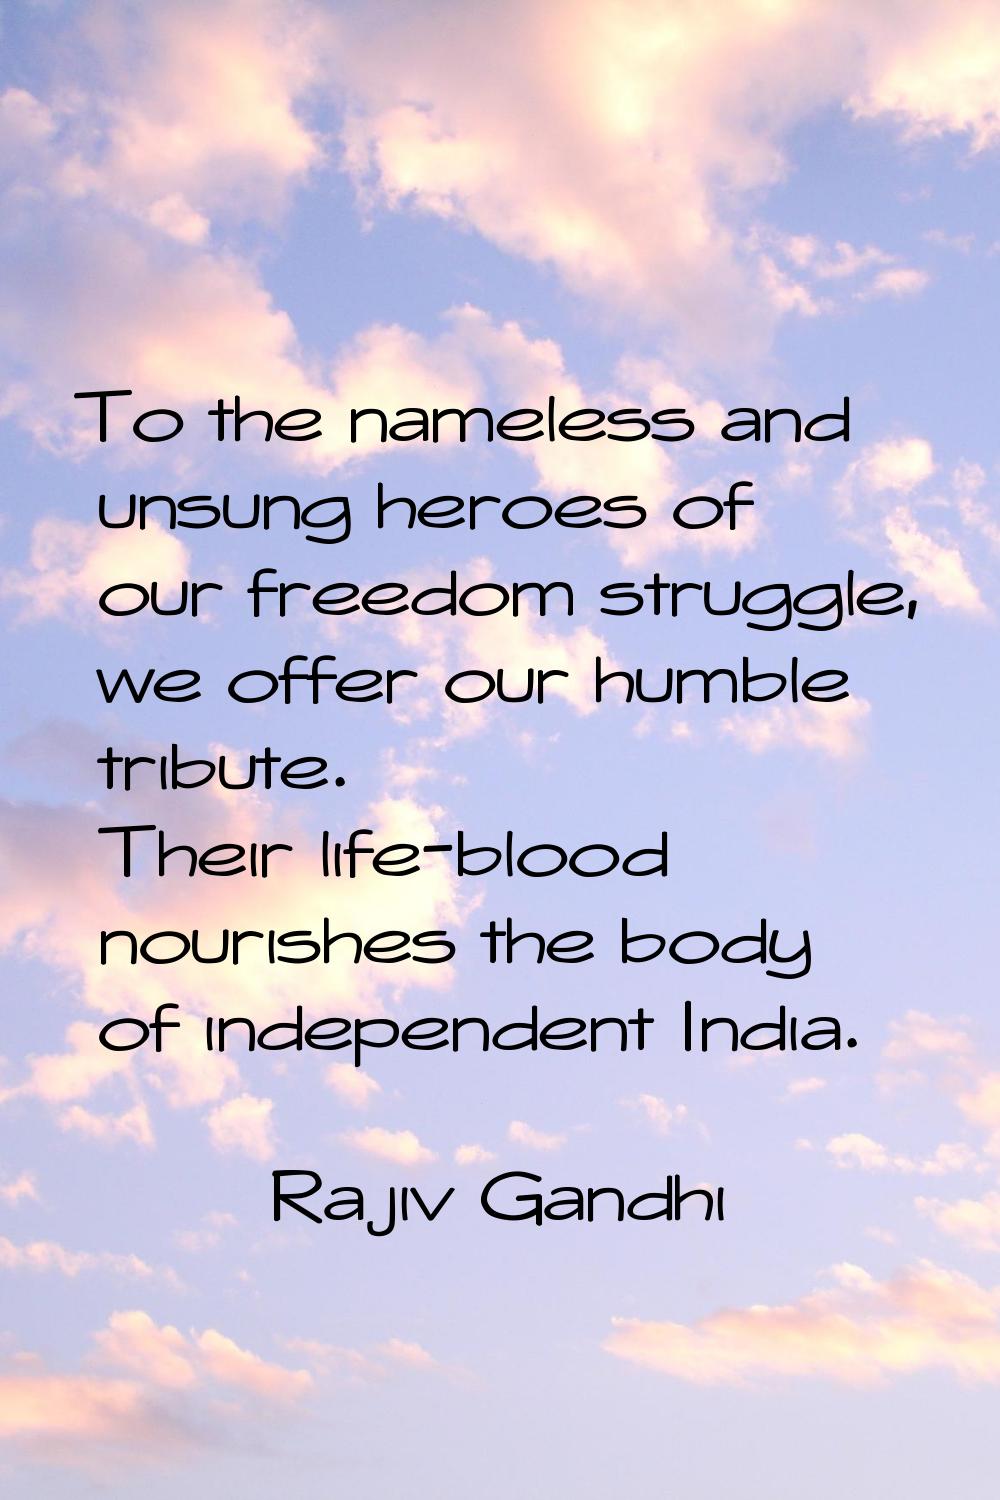 To the nameless and unsung heroes of our freedom struggle, we offer our humble tribute. Their life-